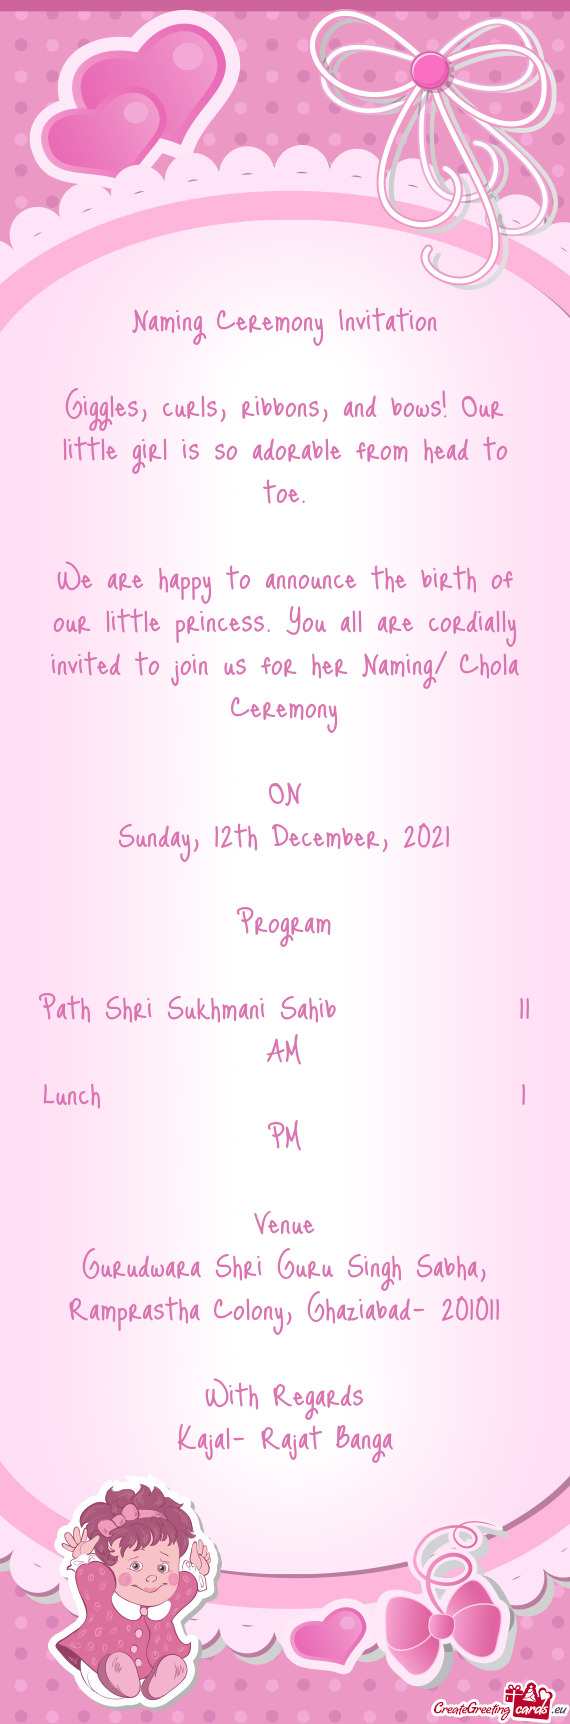 We are happy to announce the birth of our little princess. You all are cordially invited to join us